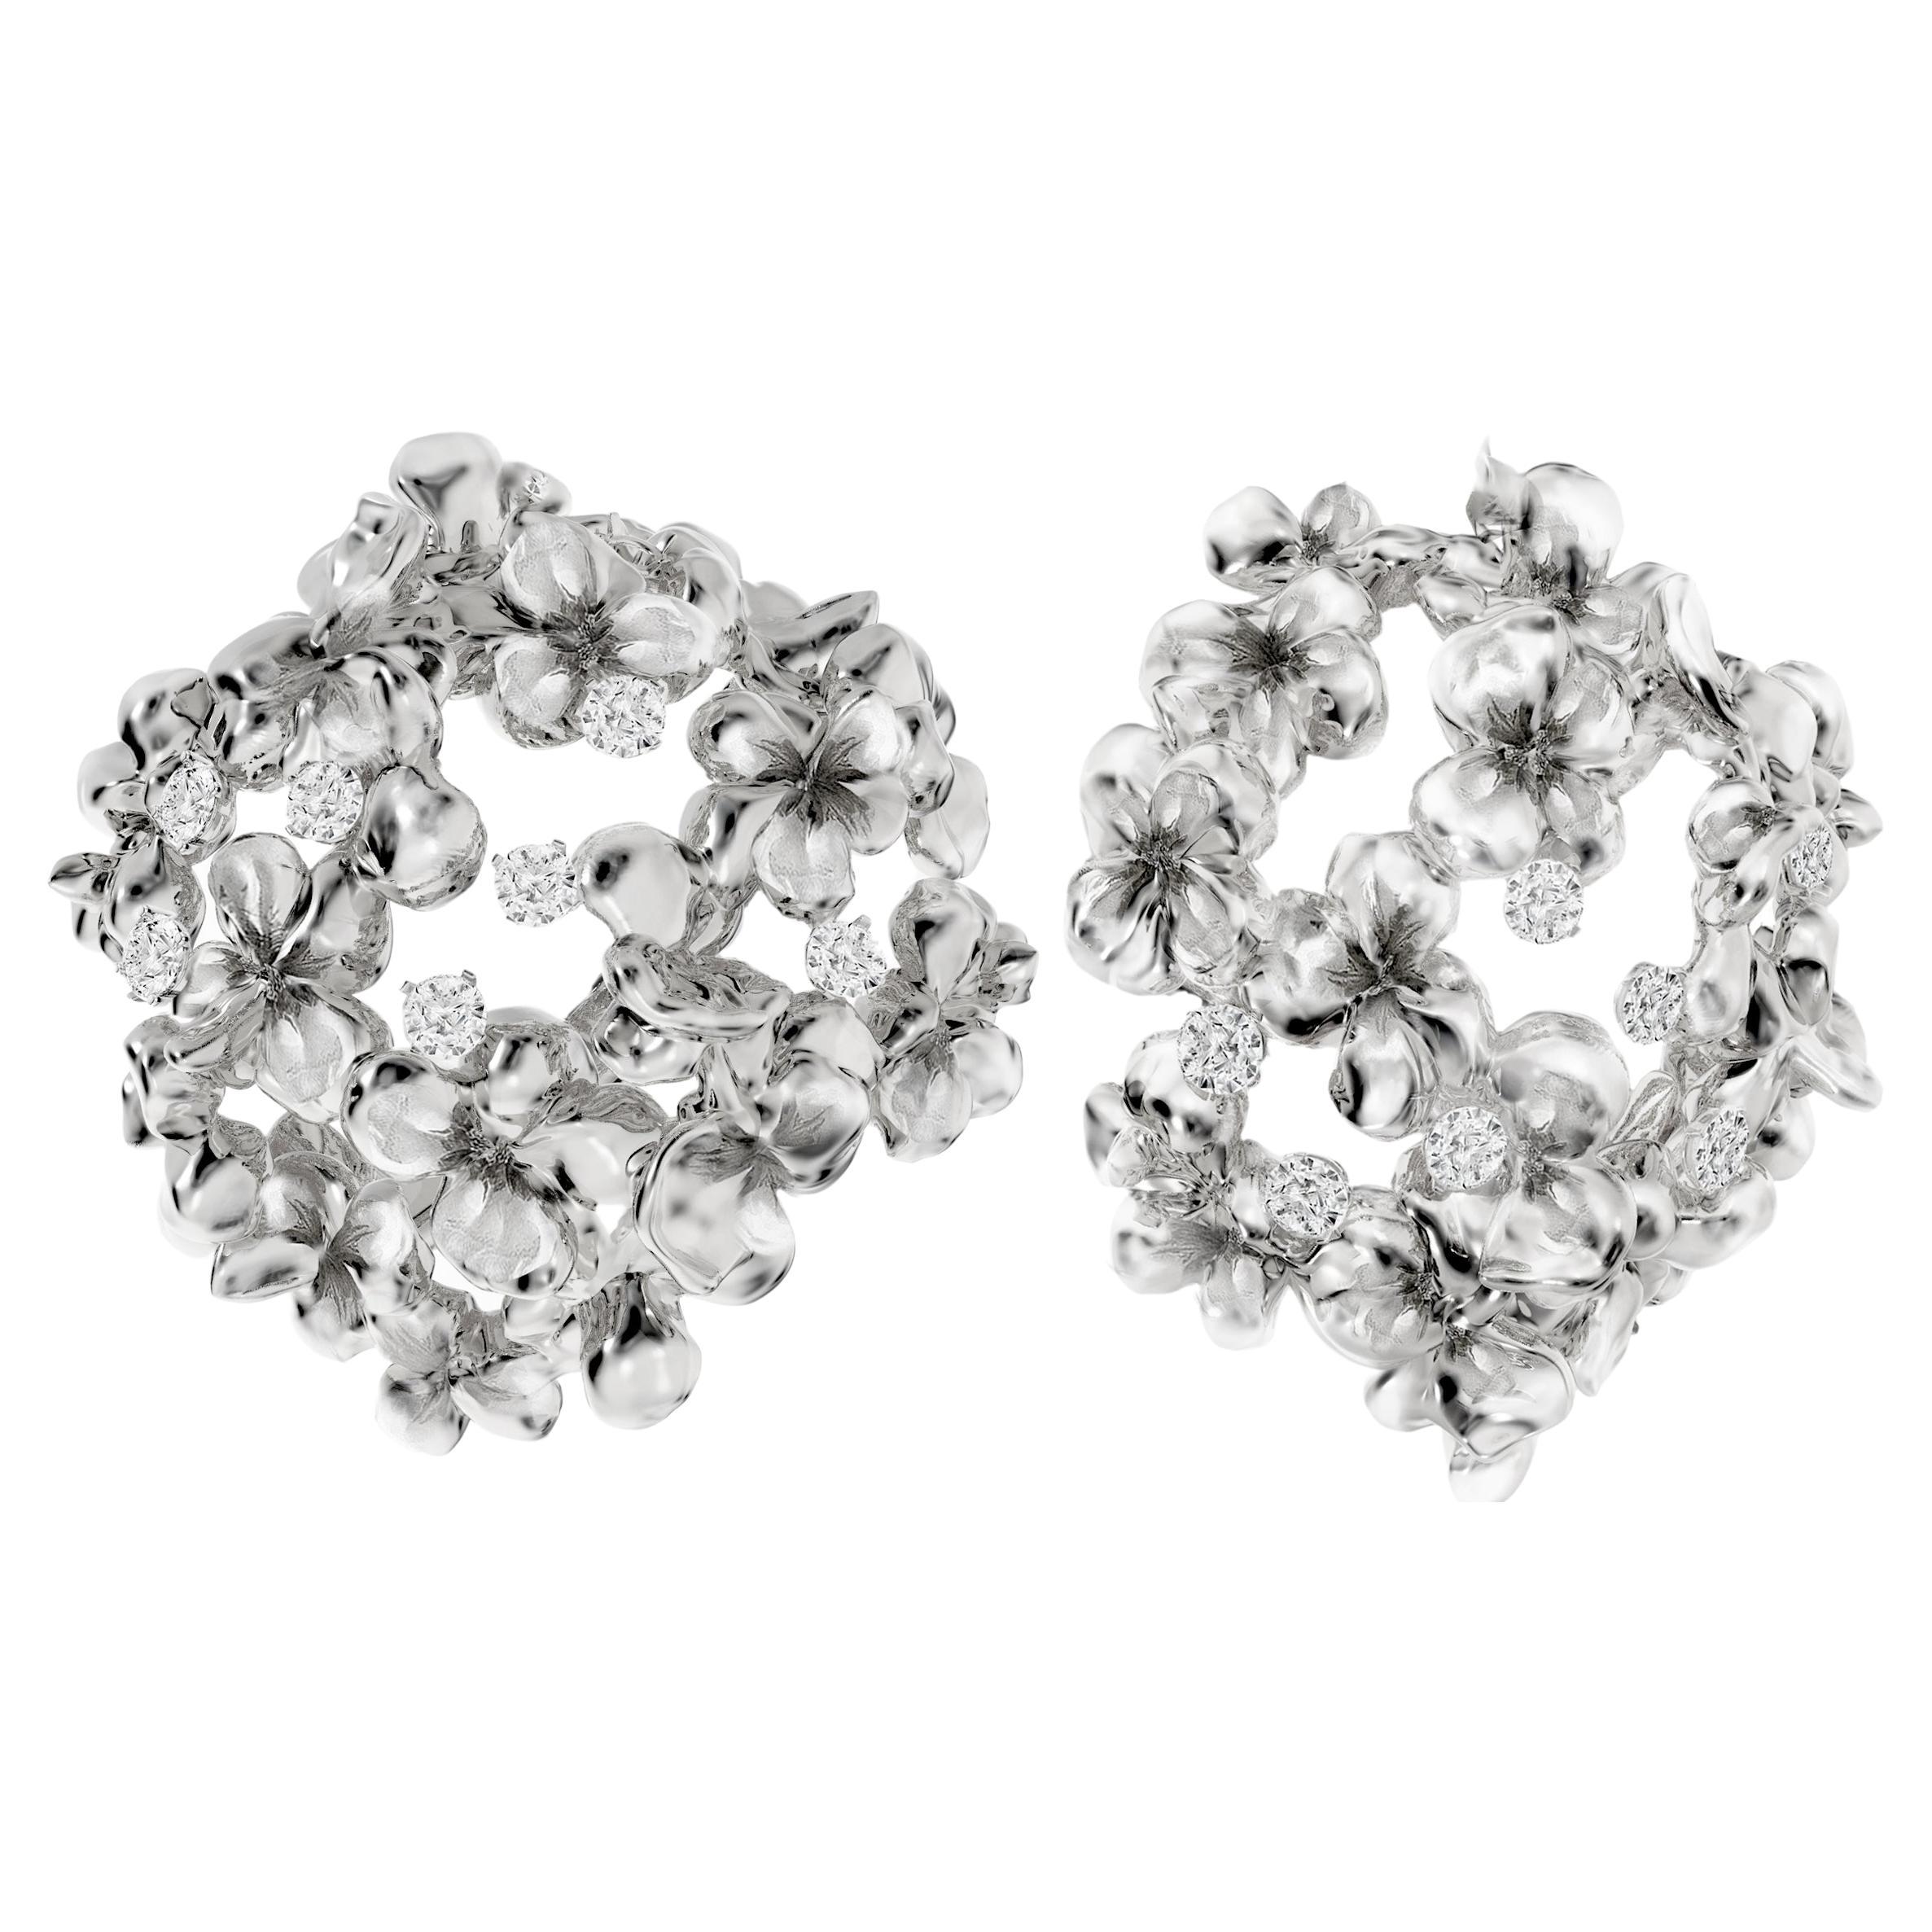 White Gold Contemporary Hortensia Earrings with Fourteen Diamonds